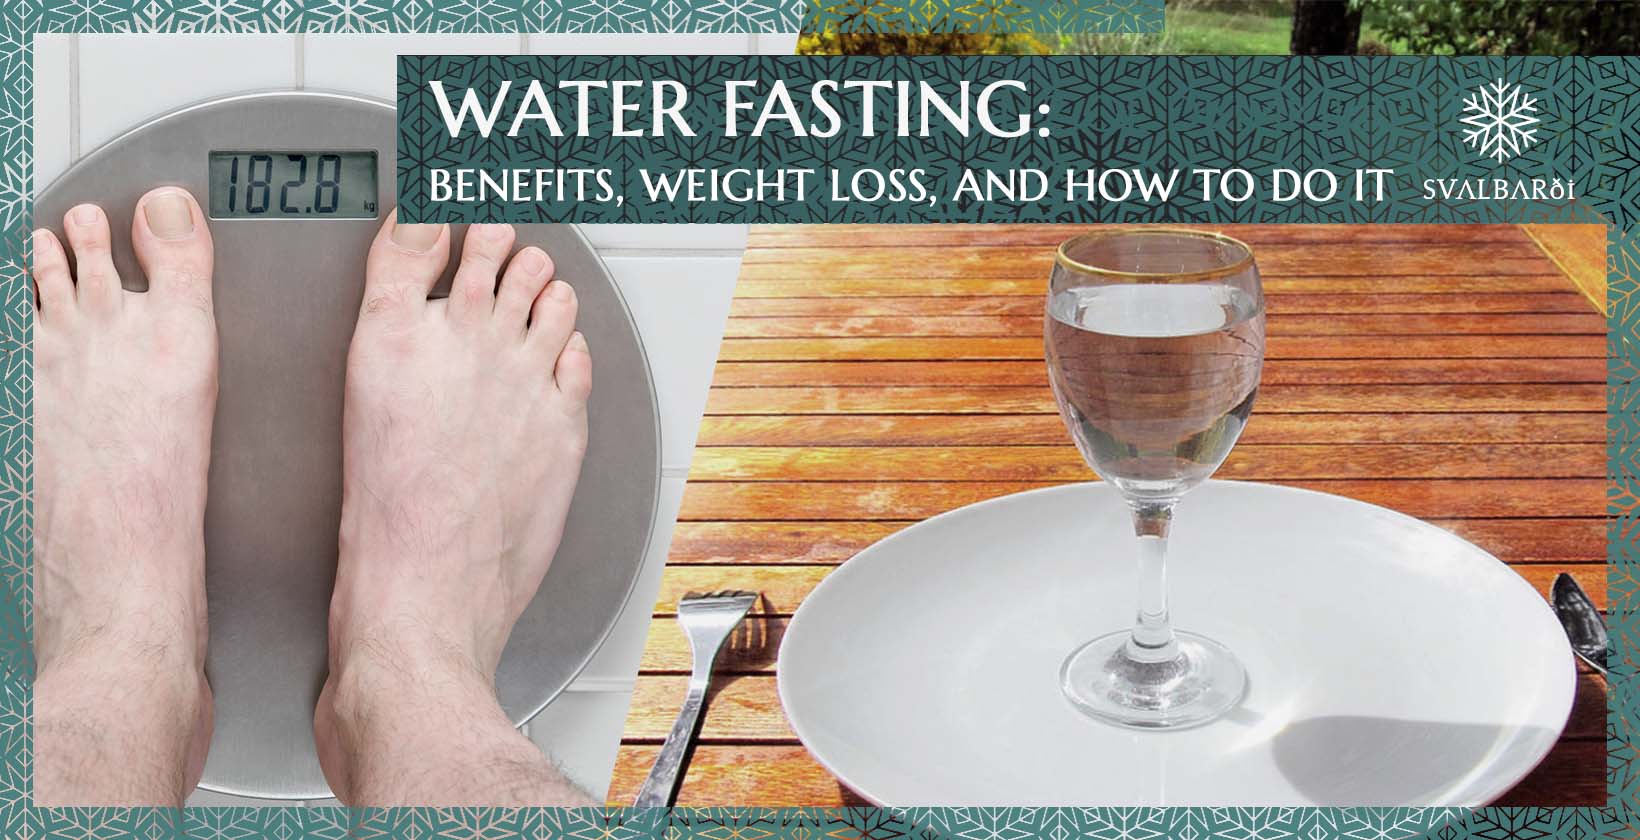 Water fasting: Benefits, Weight Loss, and How to do it – Svalbarði